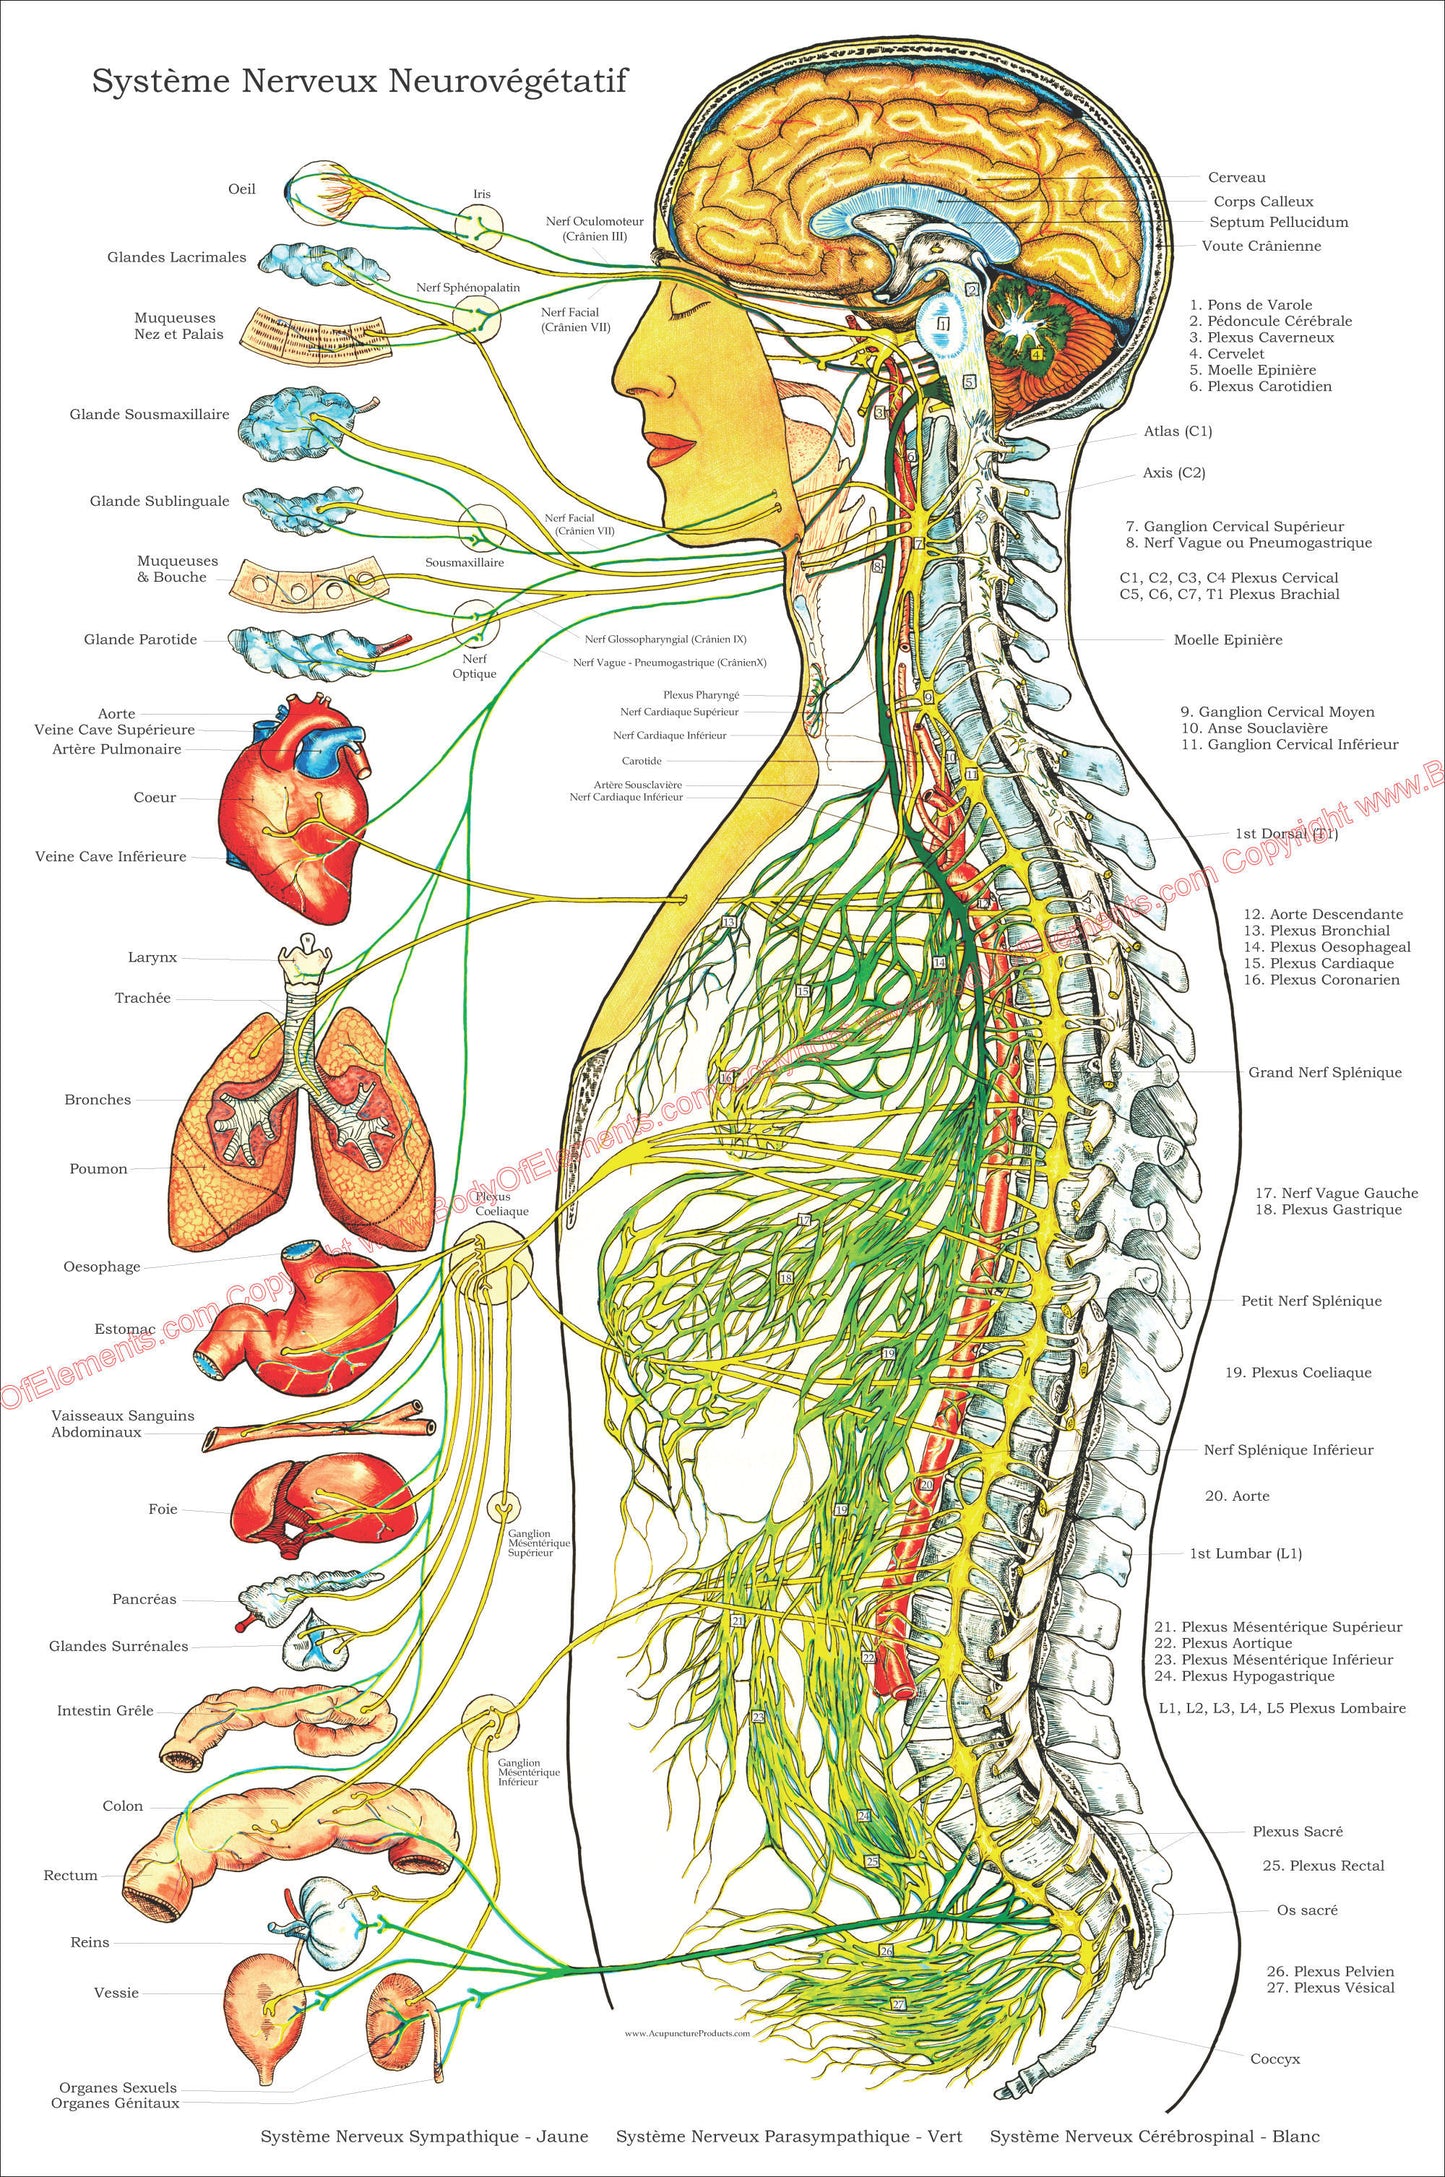 Autonomic nervous system poster in French